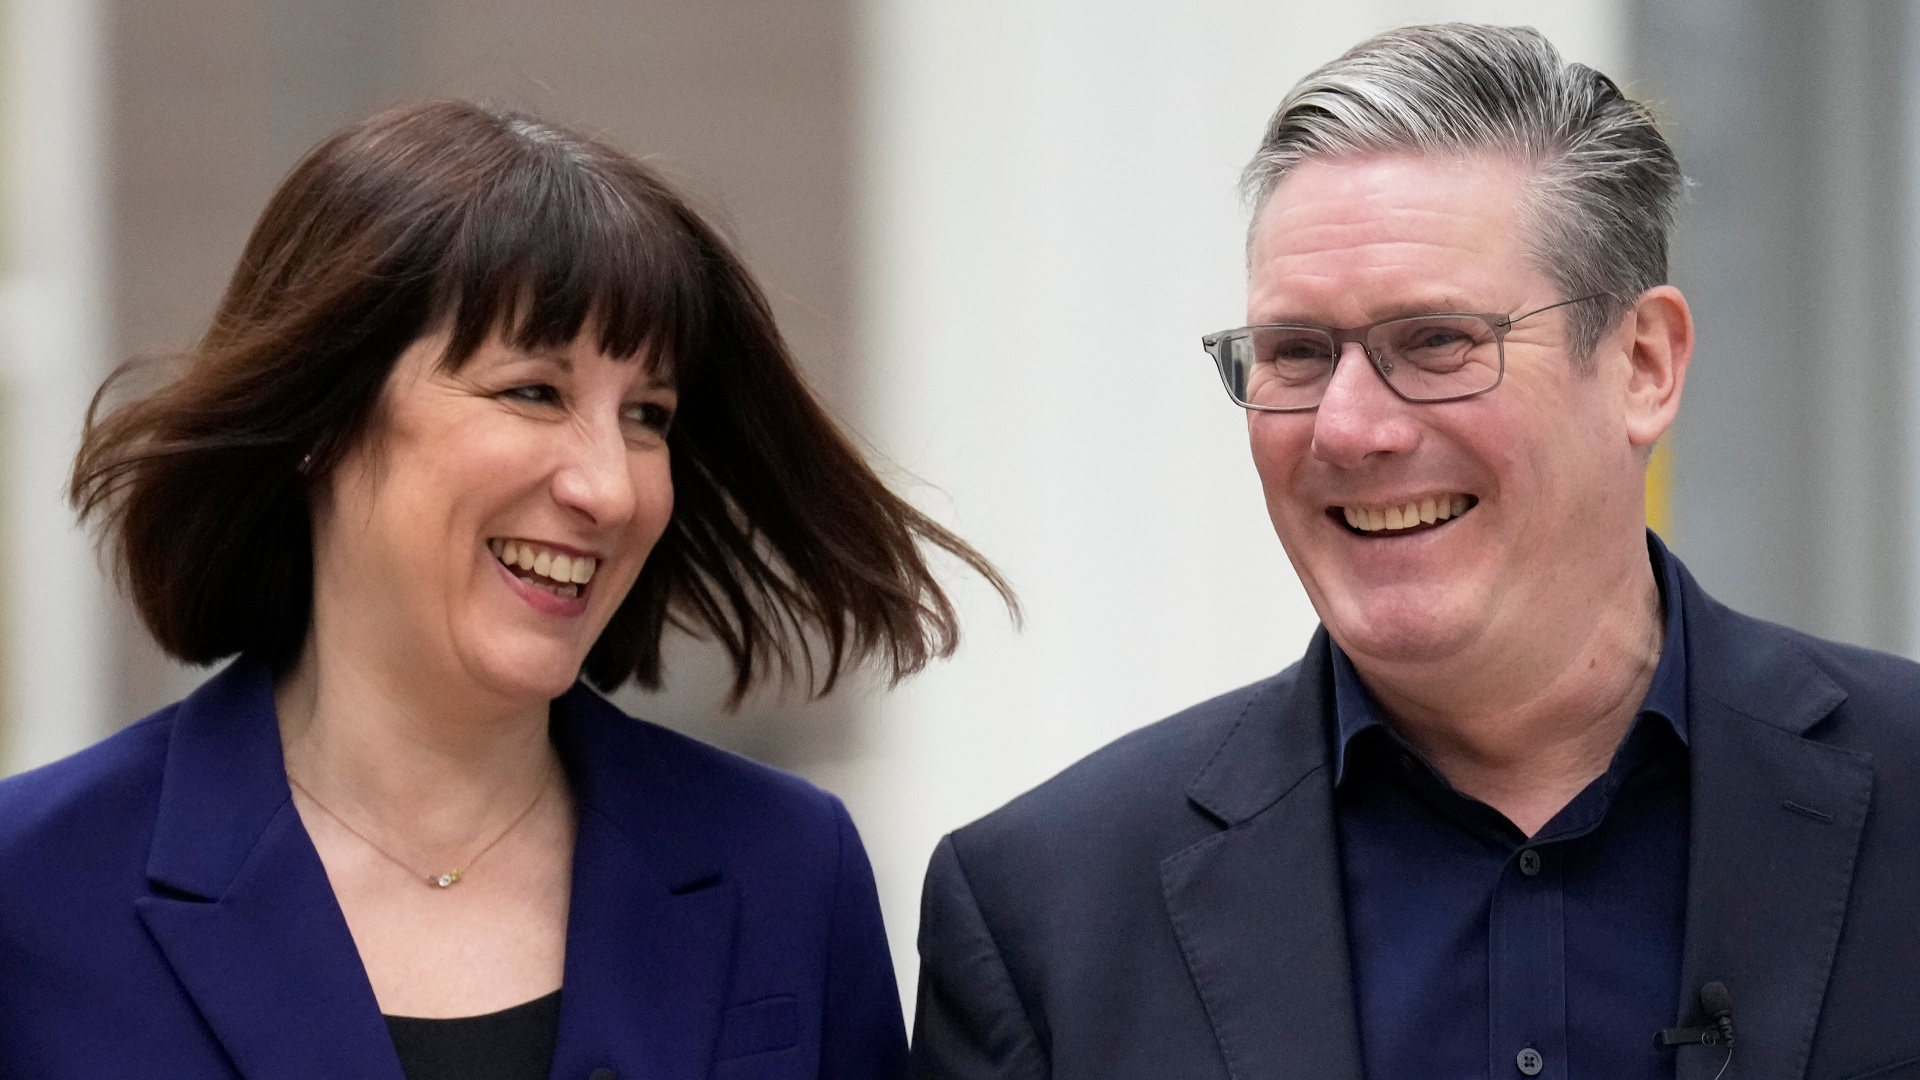 All smiles... but will Rachel Reeves and Keir Starmer be able to bring us the Britain we crave? Photo: Christopher Furlong/Getty